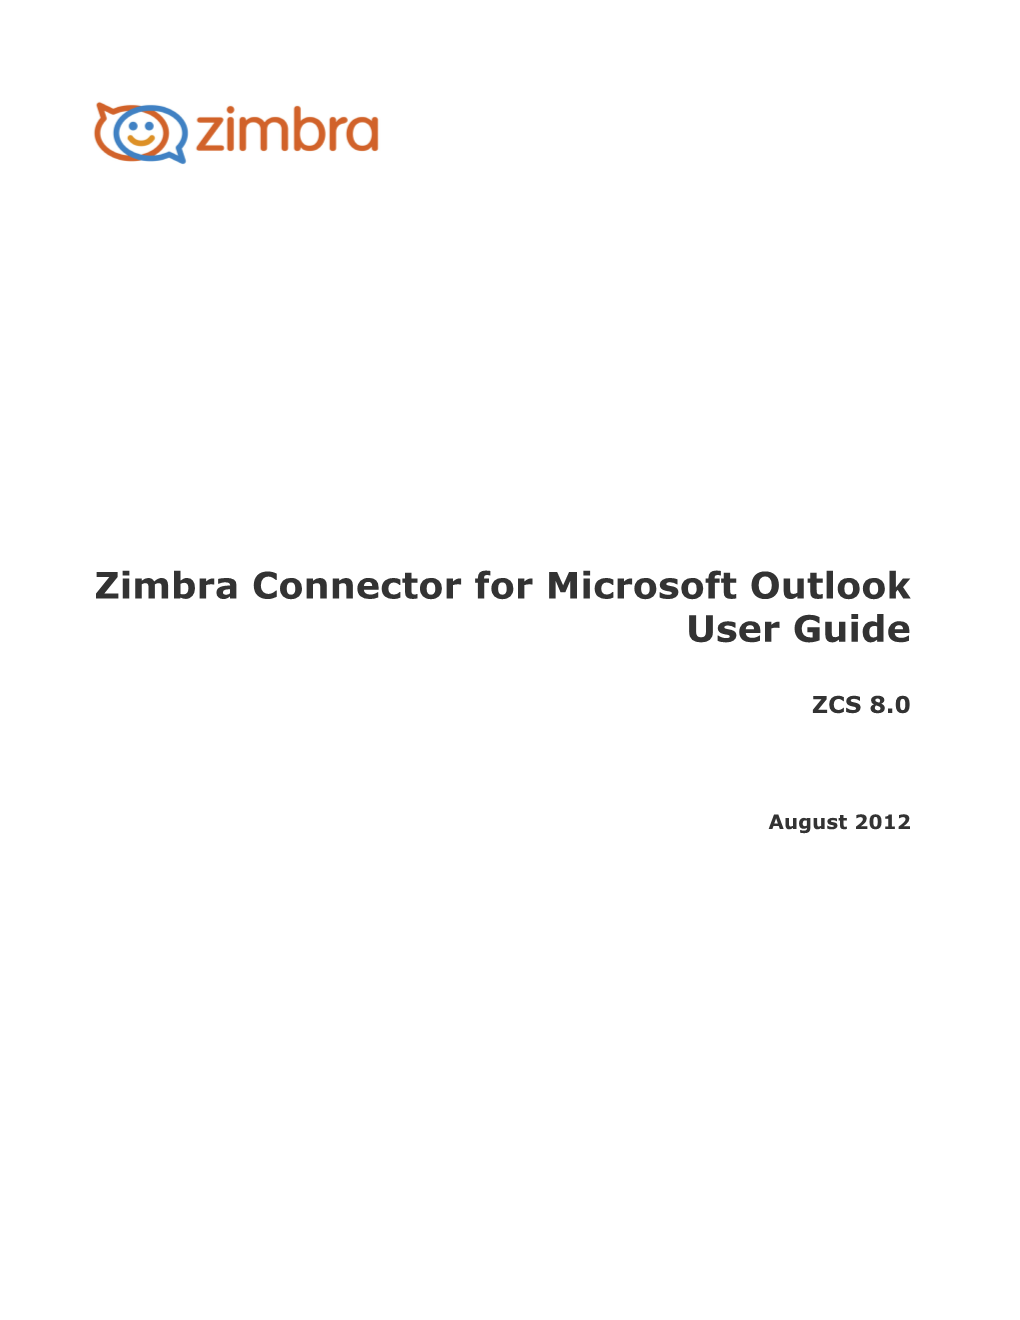 Zimbra Connector for Microsoft Outlook User Guide